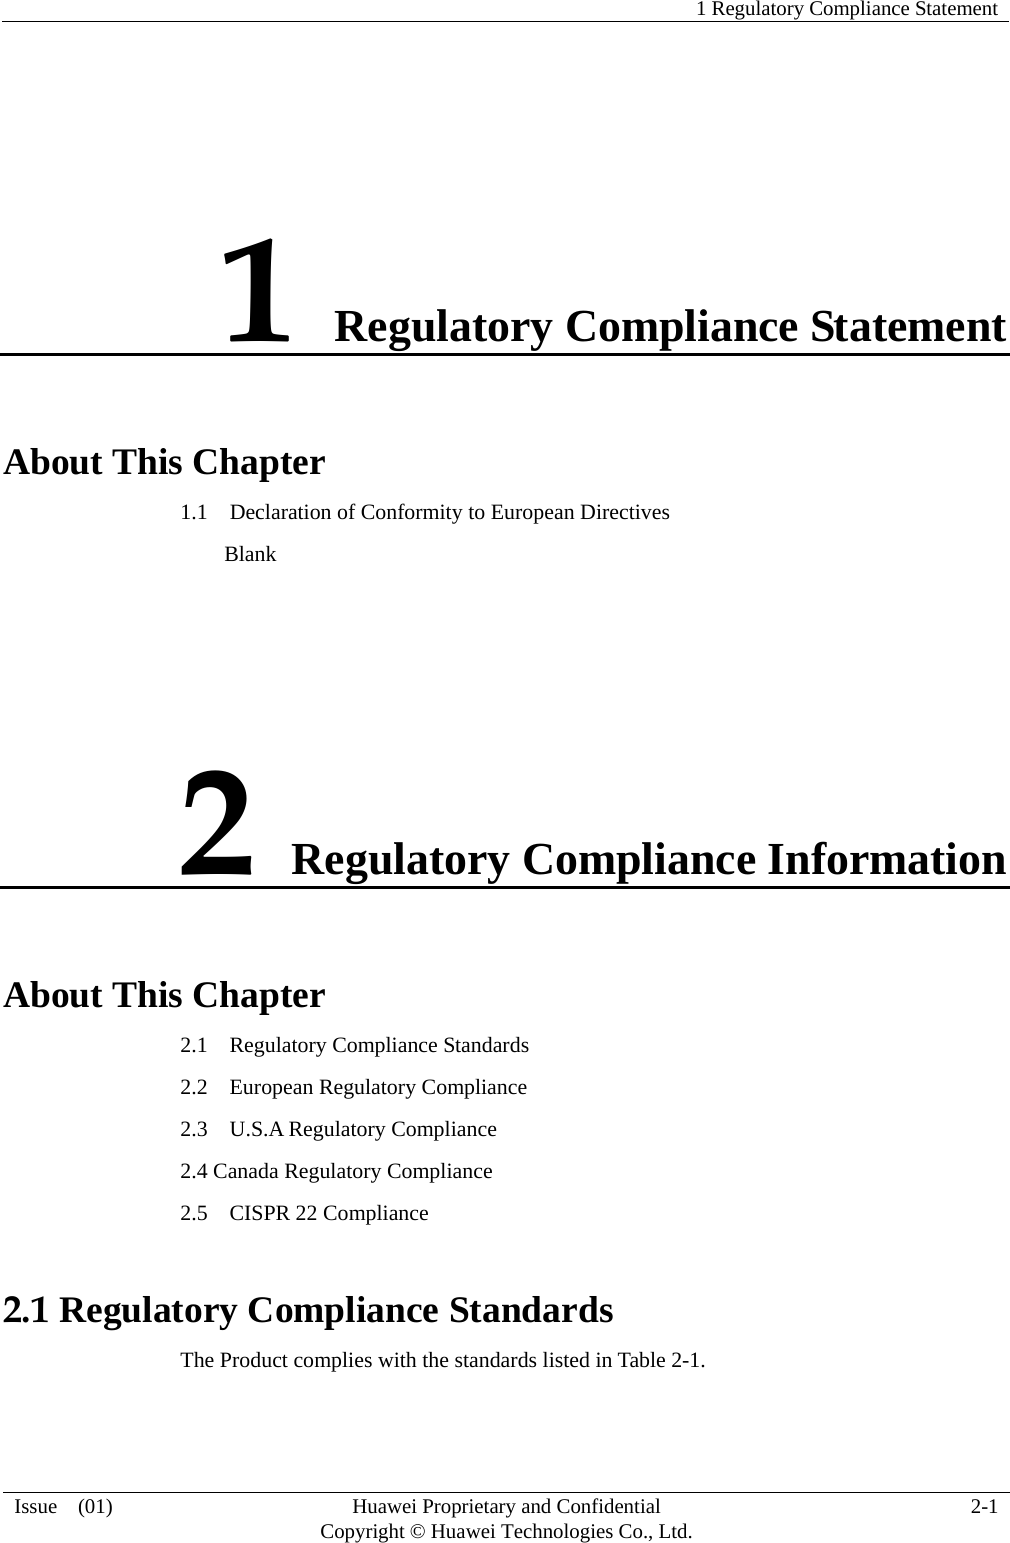   1 Regulatory Compliance Statement   Issue  (01)  Huawei Proprietary and Confidential     Copyright © Huawei Technologies Co., Ltd.  2-1  1 Regulatory Compliance Statement About This Chapter 1.1    Declaration of Conformity to European Directives     Blank 2 Regulatory Compliance Information About This Chapter 2.1    Regulatory Compliance Standards 2.2  European Regulatory Compliance 2.3  U.S.A Regulatory Compliance 2.4 Canada Regulatory Compliance 2.5    CISPR 22 Compliance 2.1 Regulatory Compliance Standards The Product complies with the standards listed in Table 2-1. 